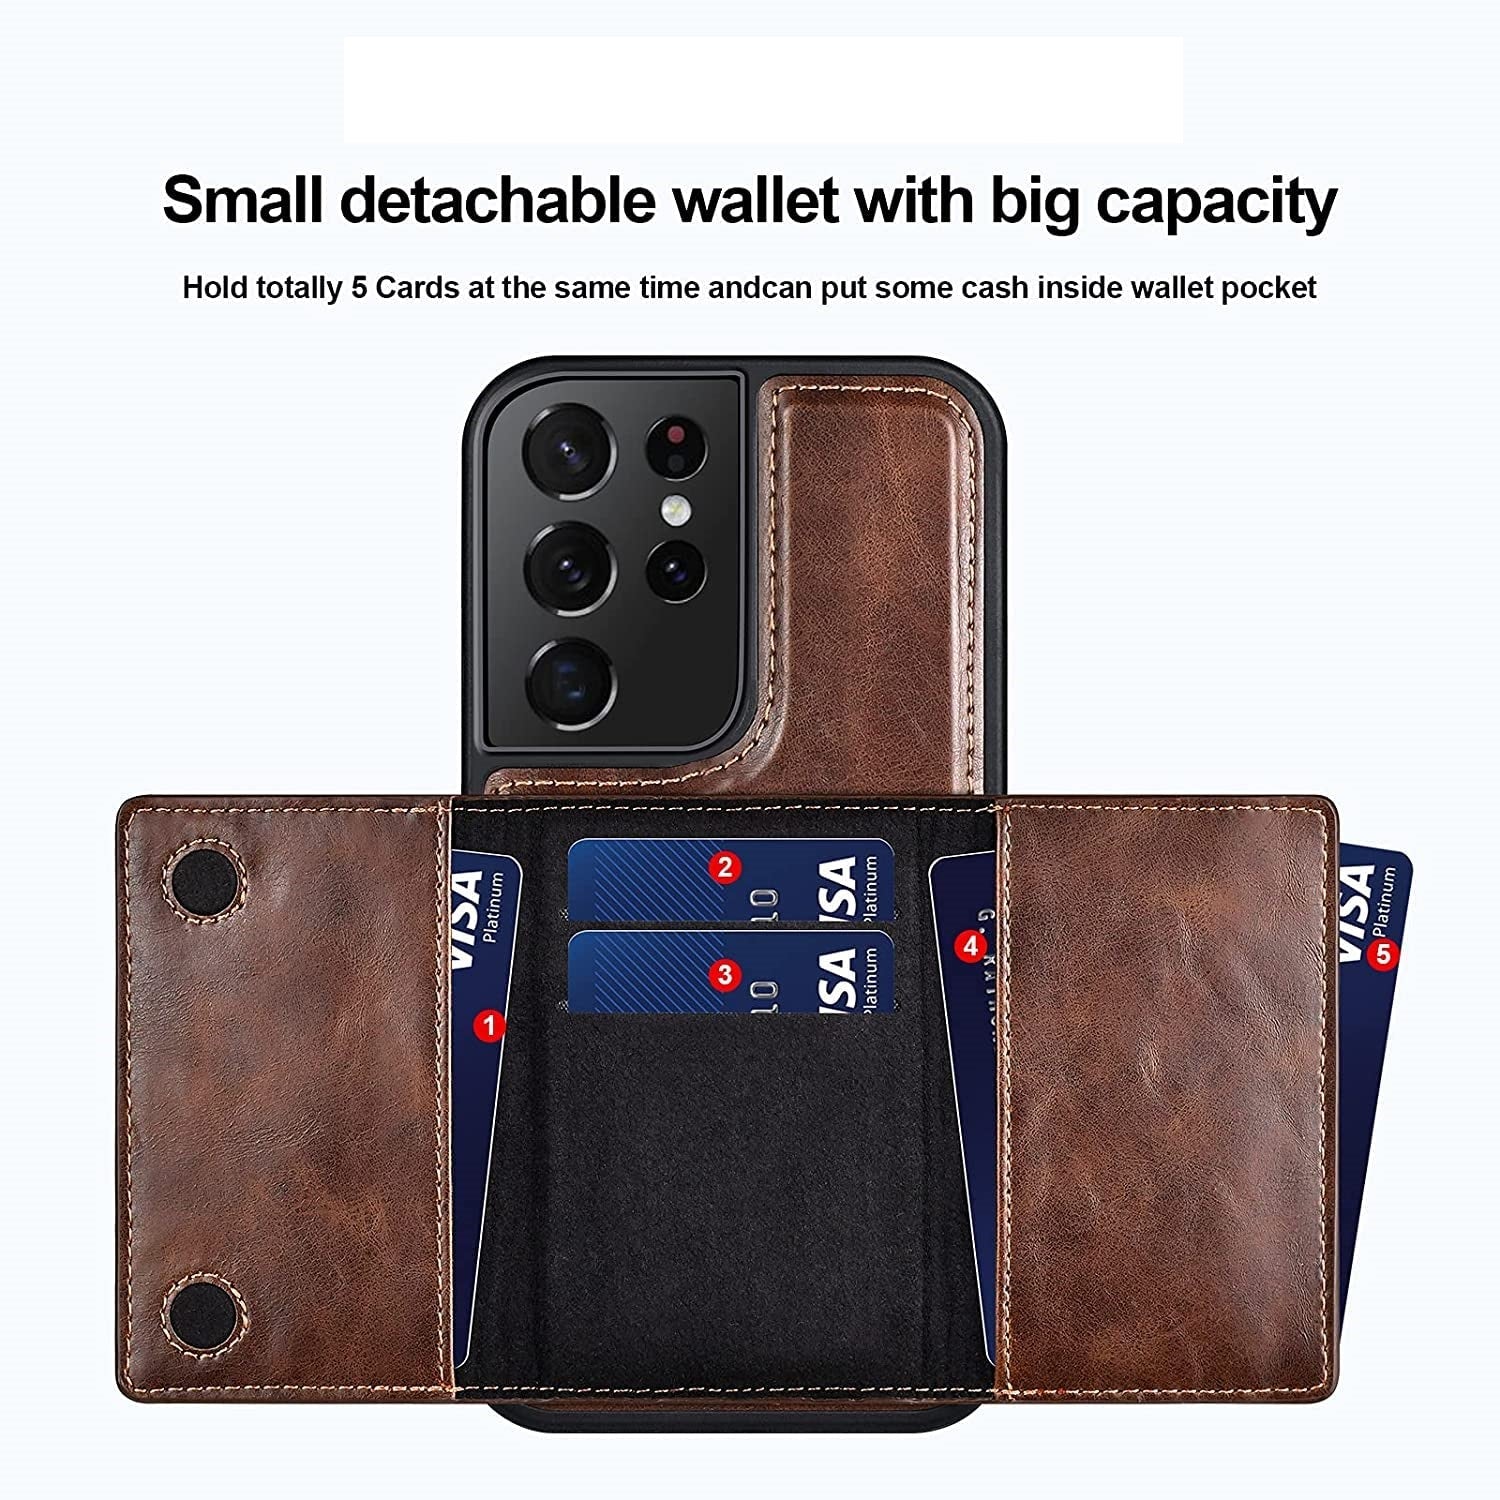 Samsung Galaxy S22 Ultra Premium Quality New Design Wallet Leather case